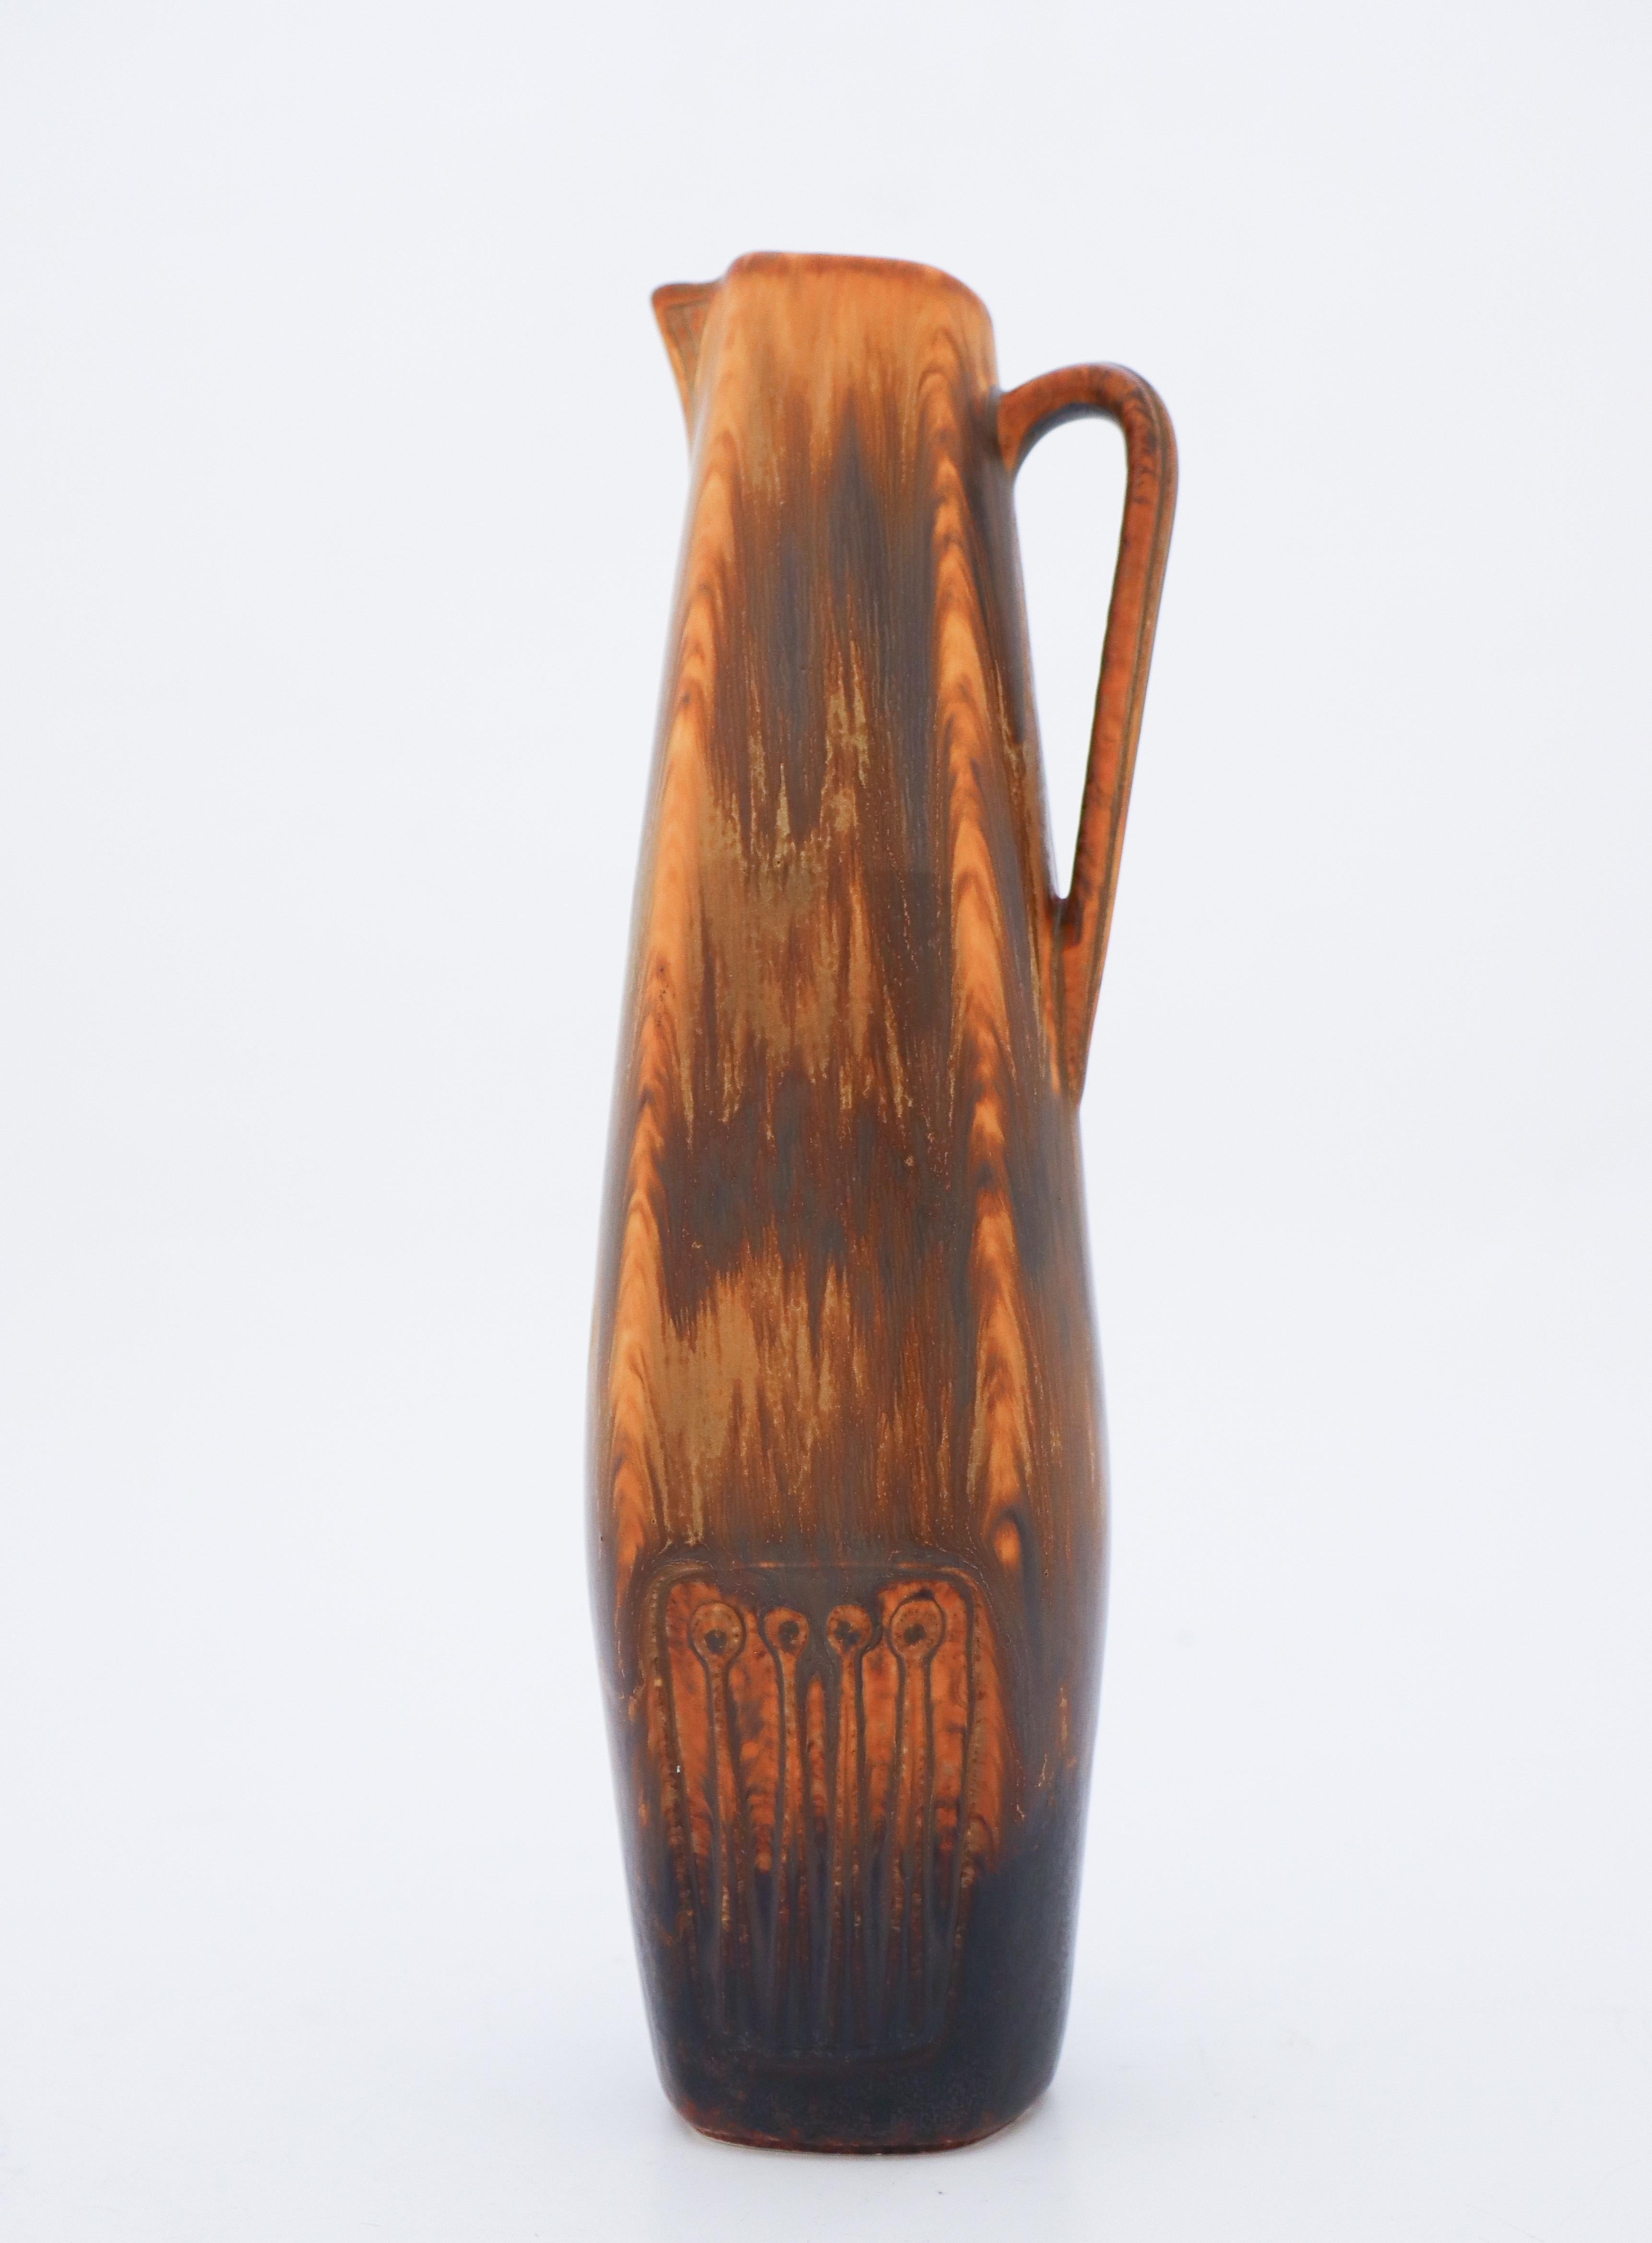 A brown vase designed by Gunnar Nylund at Rörstrand, it´s 26.5 cm (10,6) high. It´s close to mint condition and marked as 1:st quality. 

Gunnar Nylund was born in Paris 1904 with parents who worked as sculptors and designer so he really soon